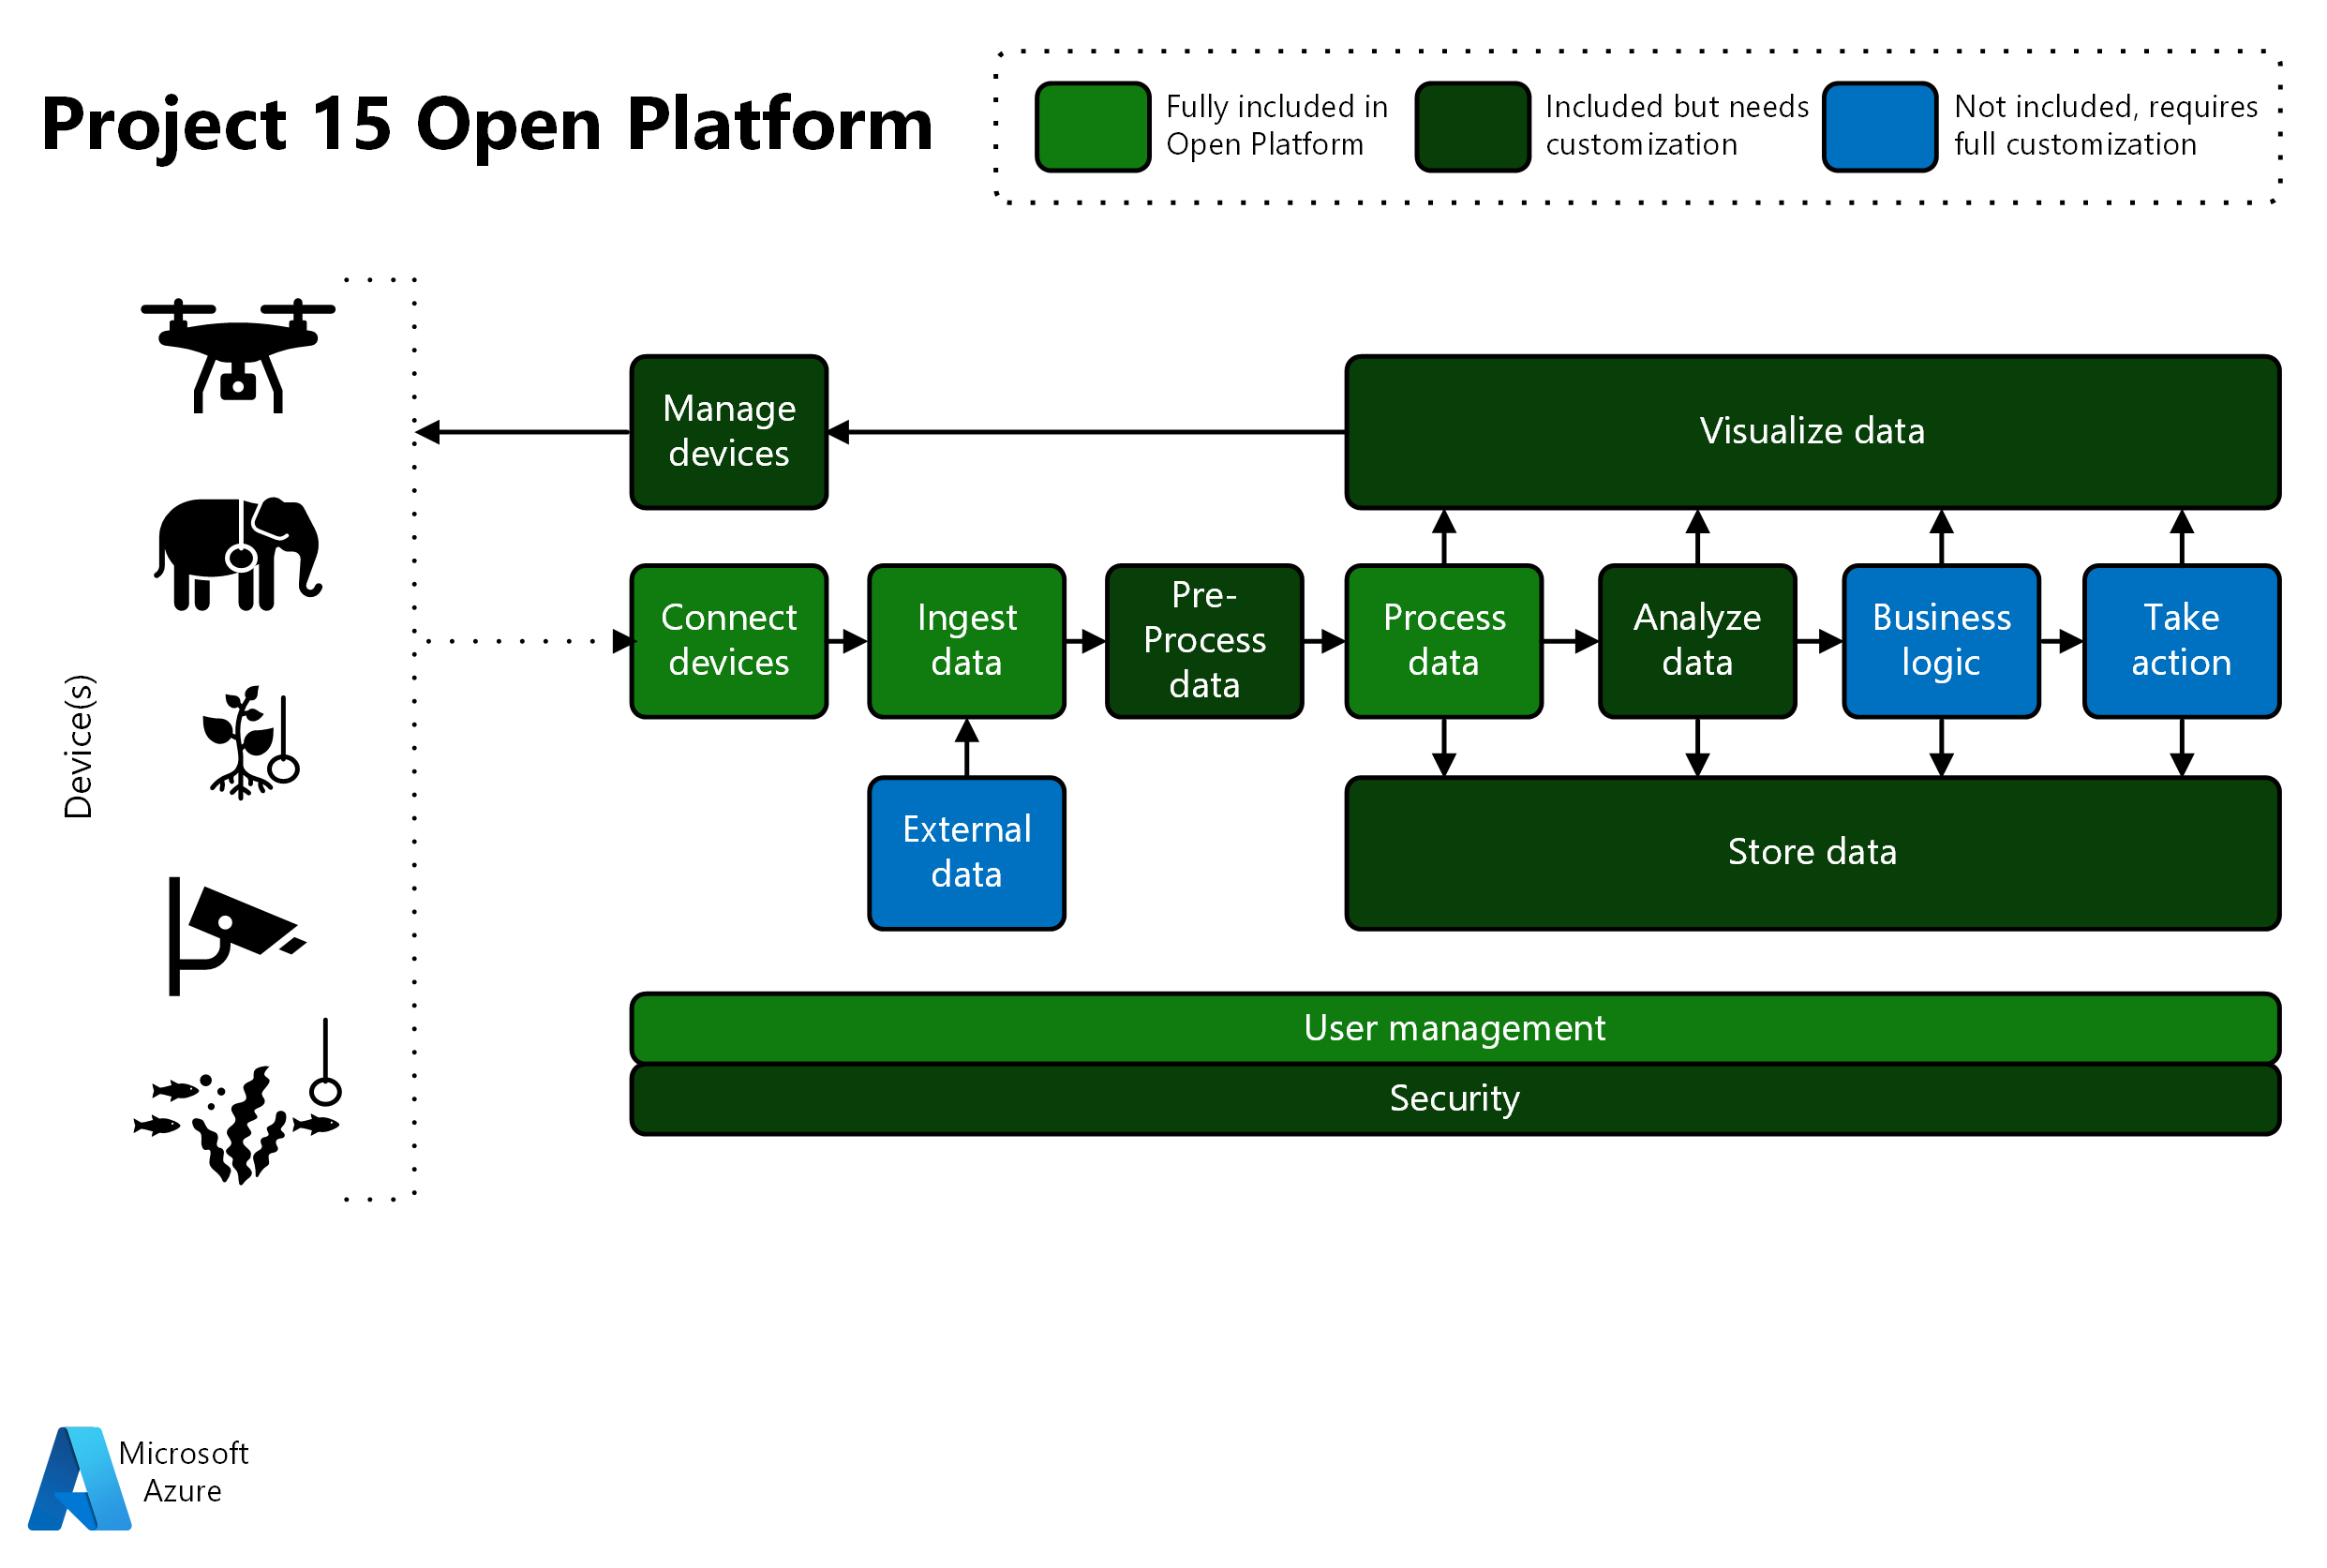 Diagram providing an overview of Project 15 Open Platform functionality. Colors indicate the level of customization that each area requires.